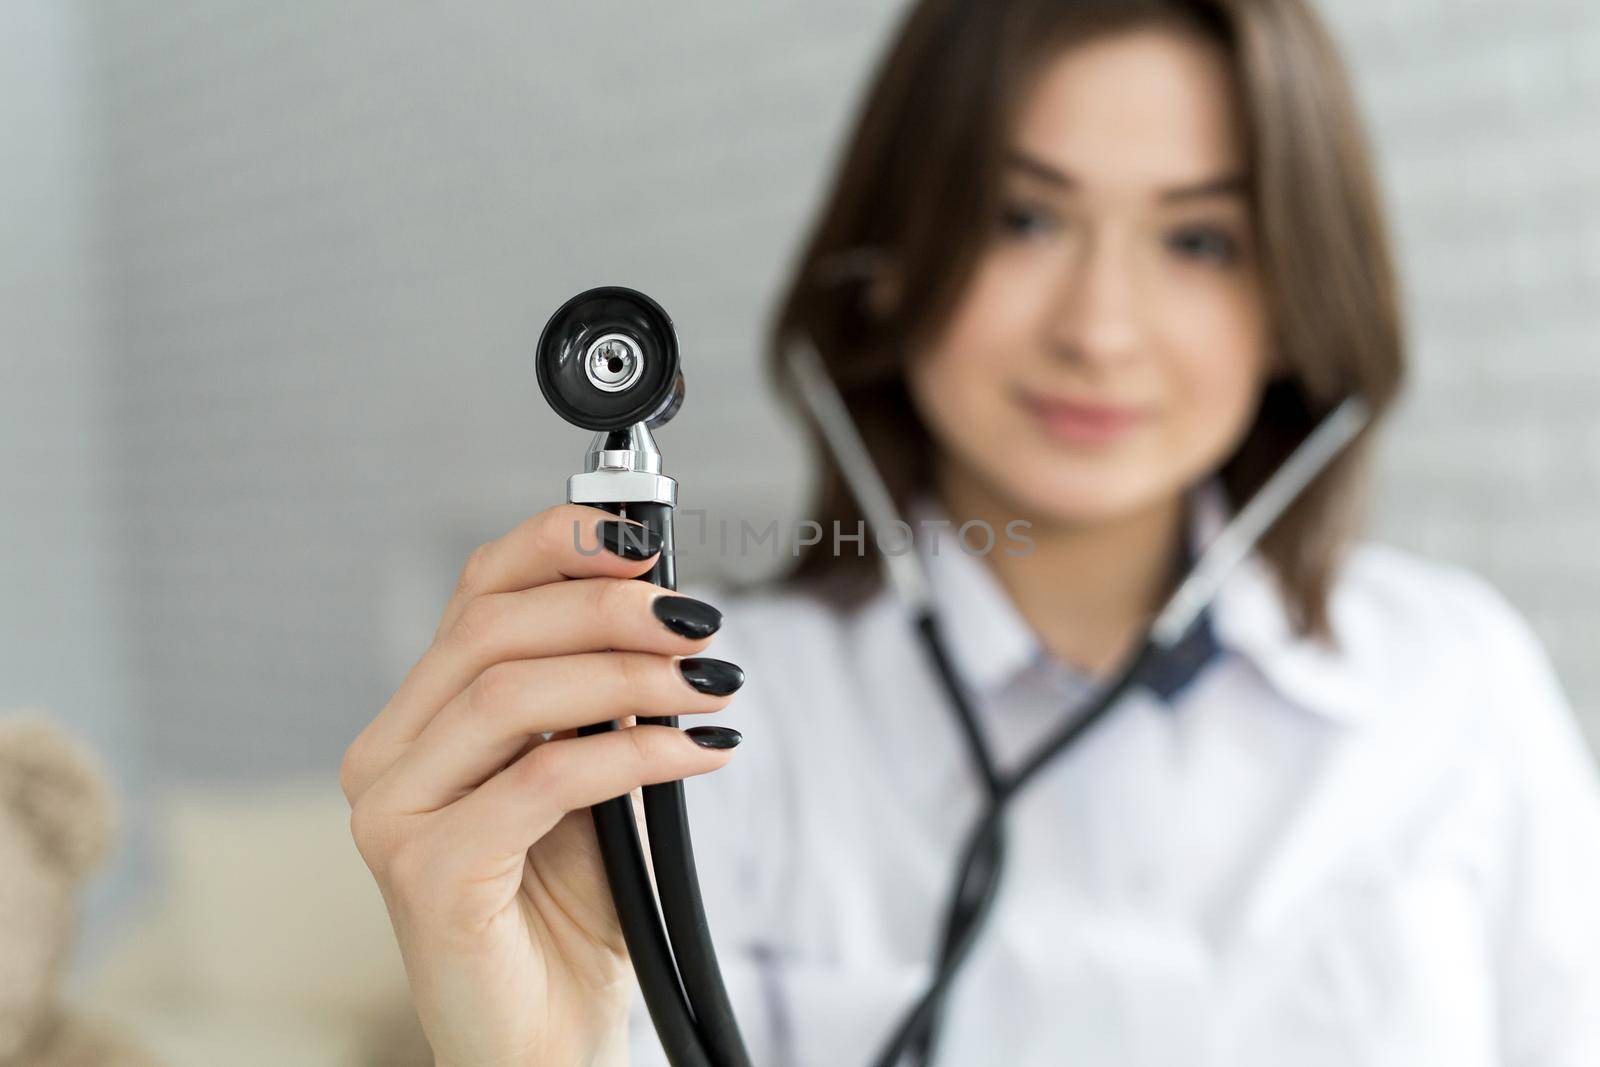 Medical doctor woman holding a stethoscope focus on the stethoscope. by StudioPeace